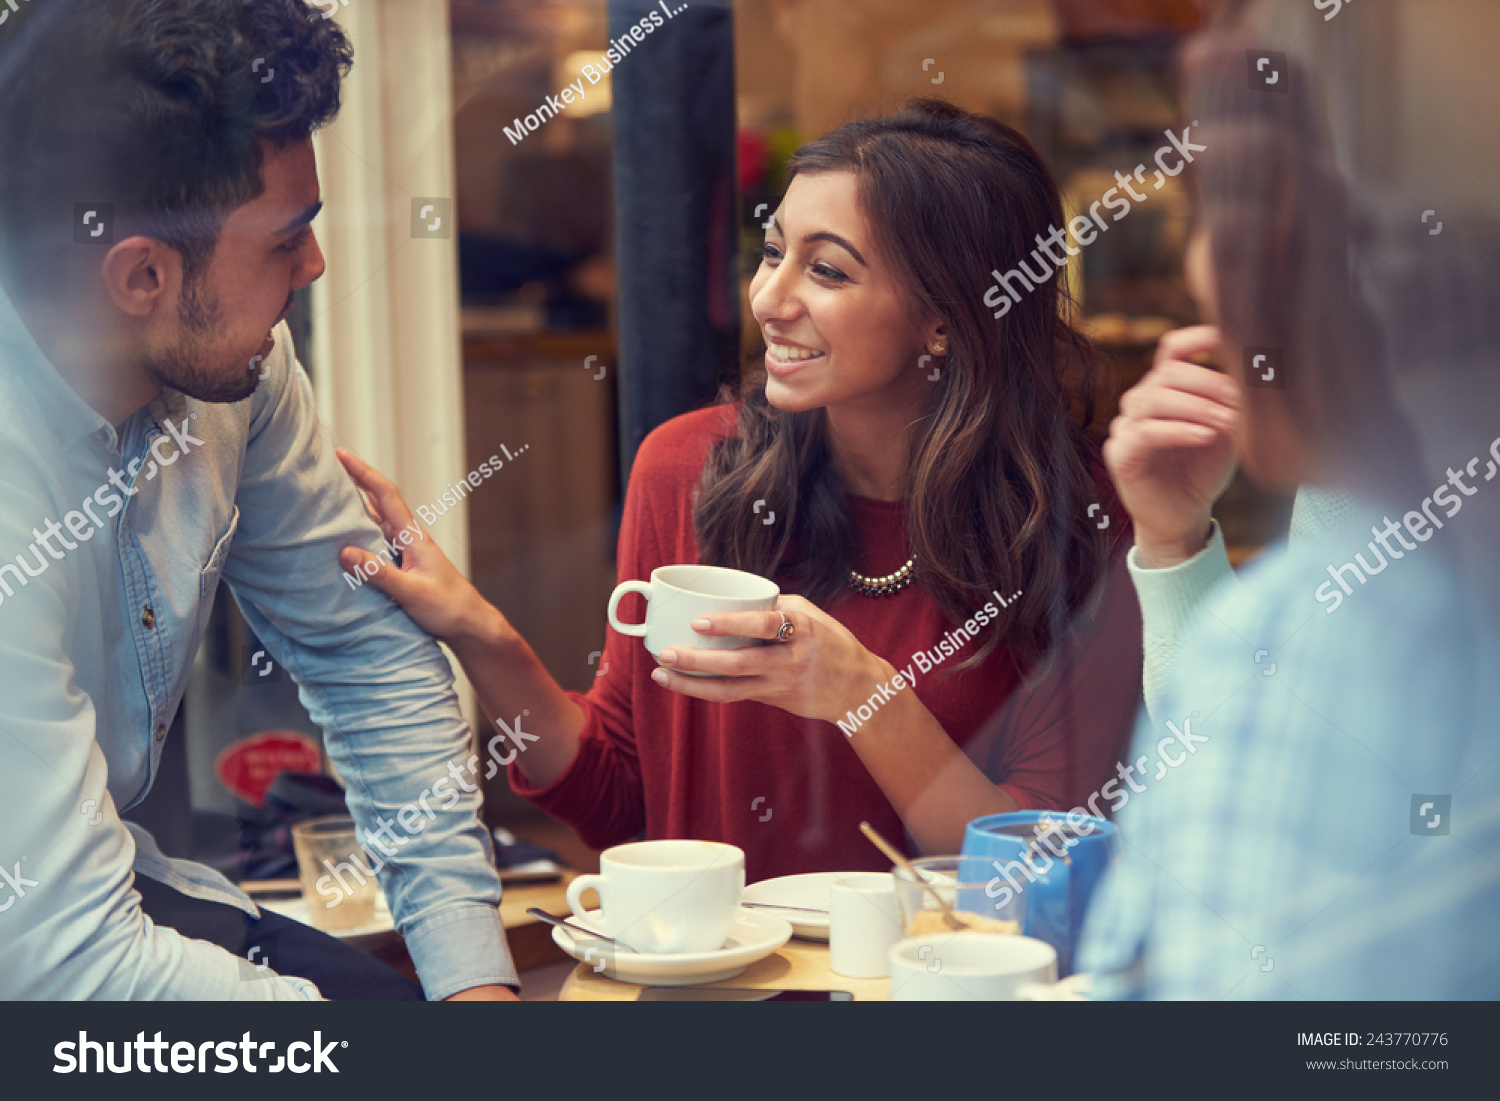 Group Of Friends In CafÃ?Â¢?? Relaxing Together #243770776